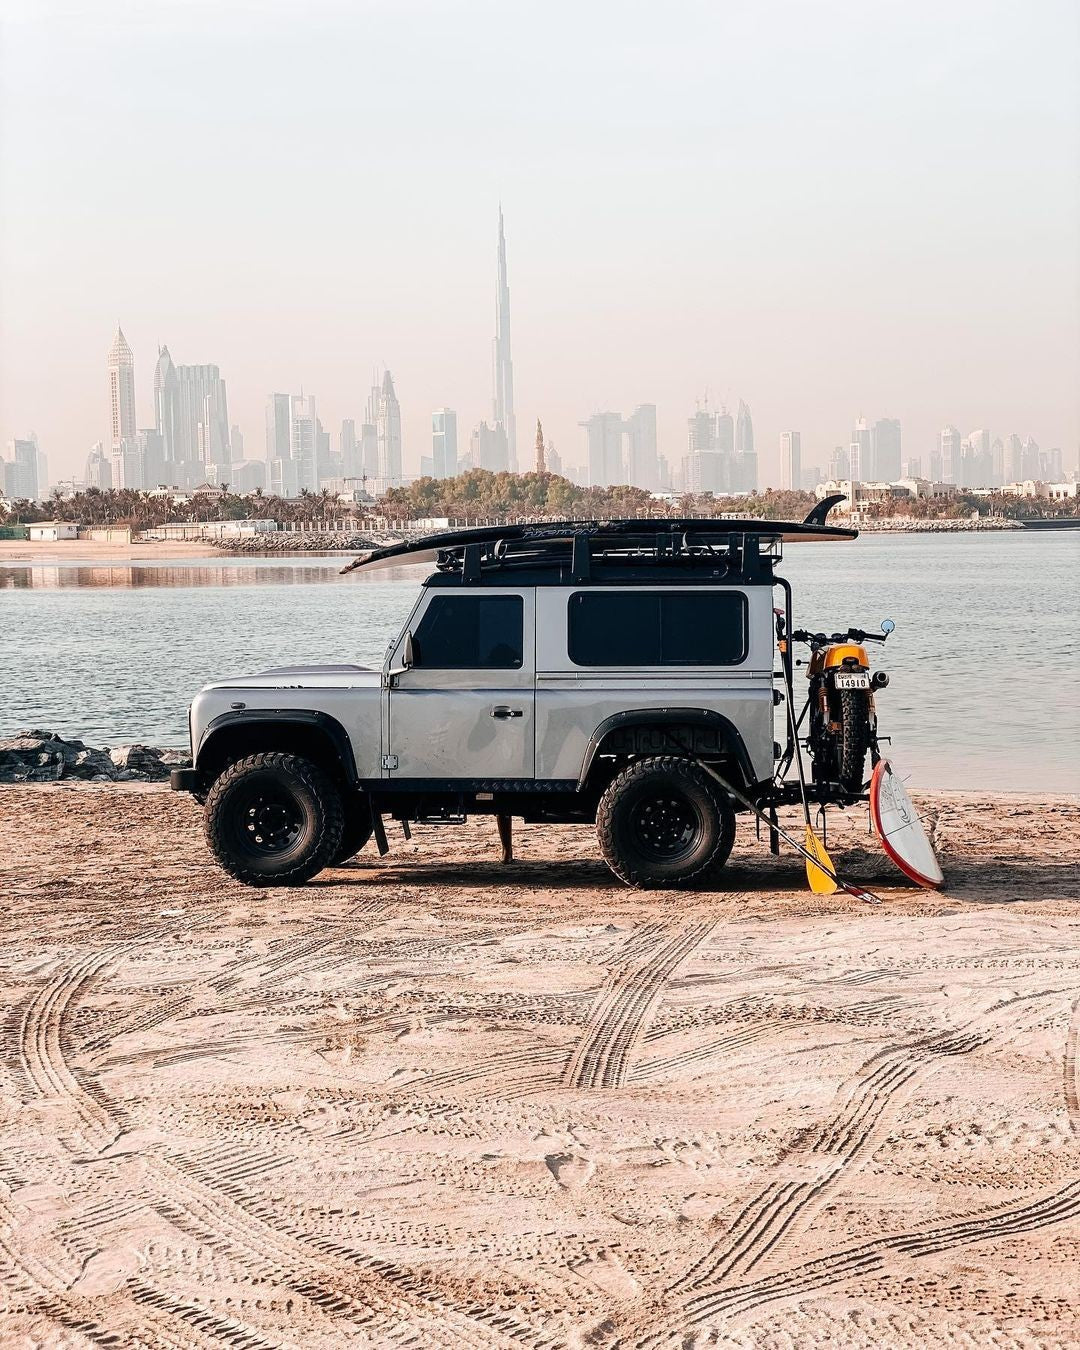 Triumph Motorcycle Rack on a Land Rover Defender